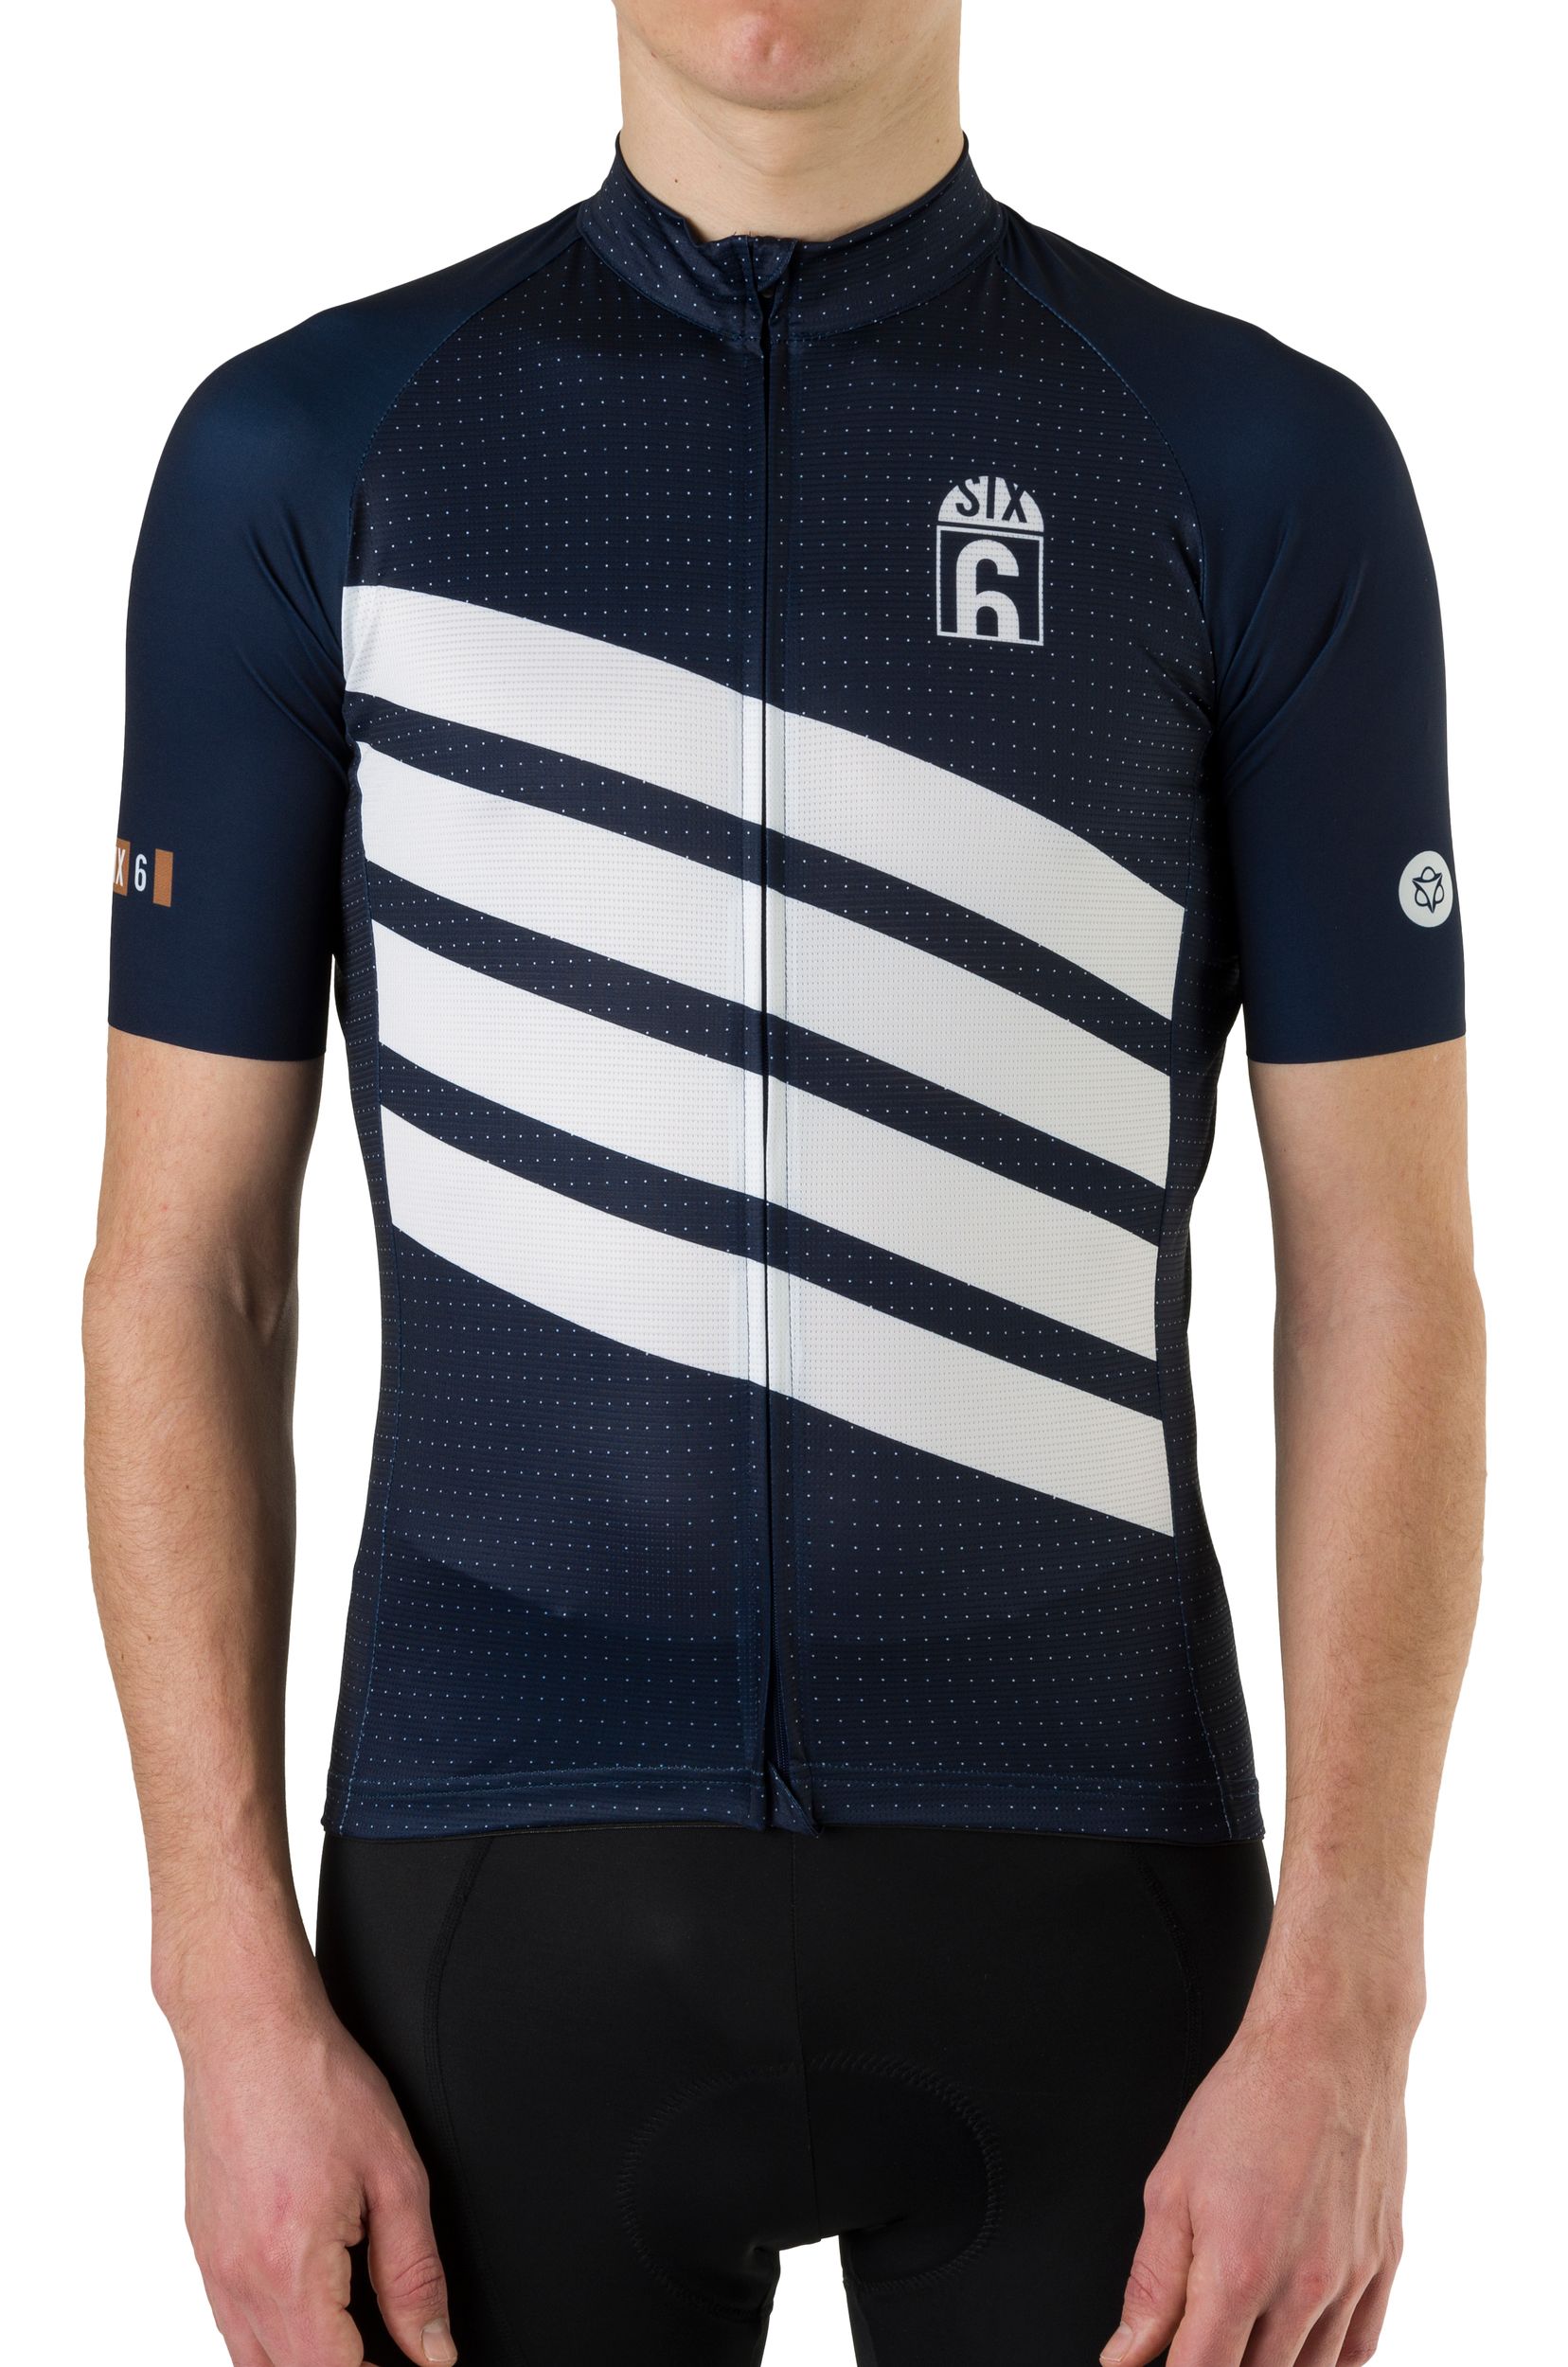 Classic Maillot SIX6 Hombres fit example